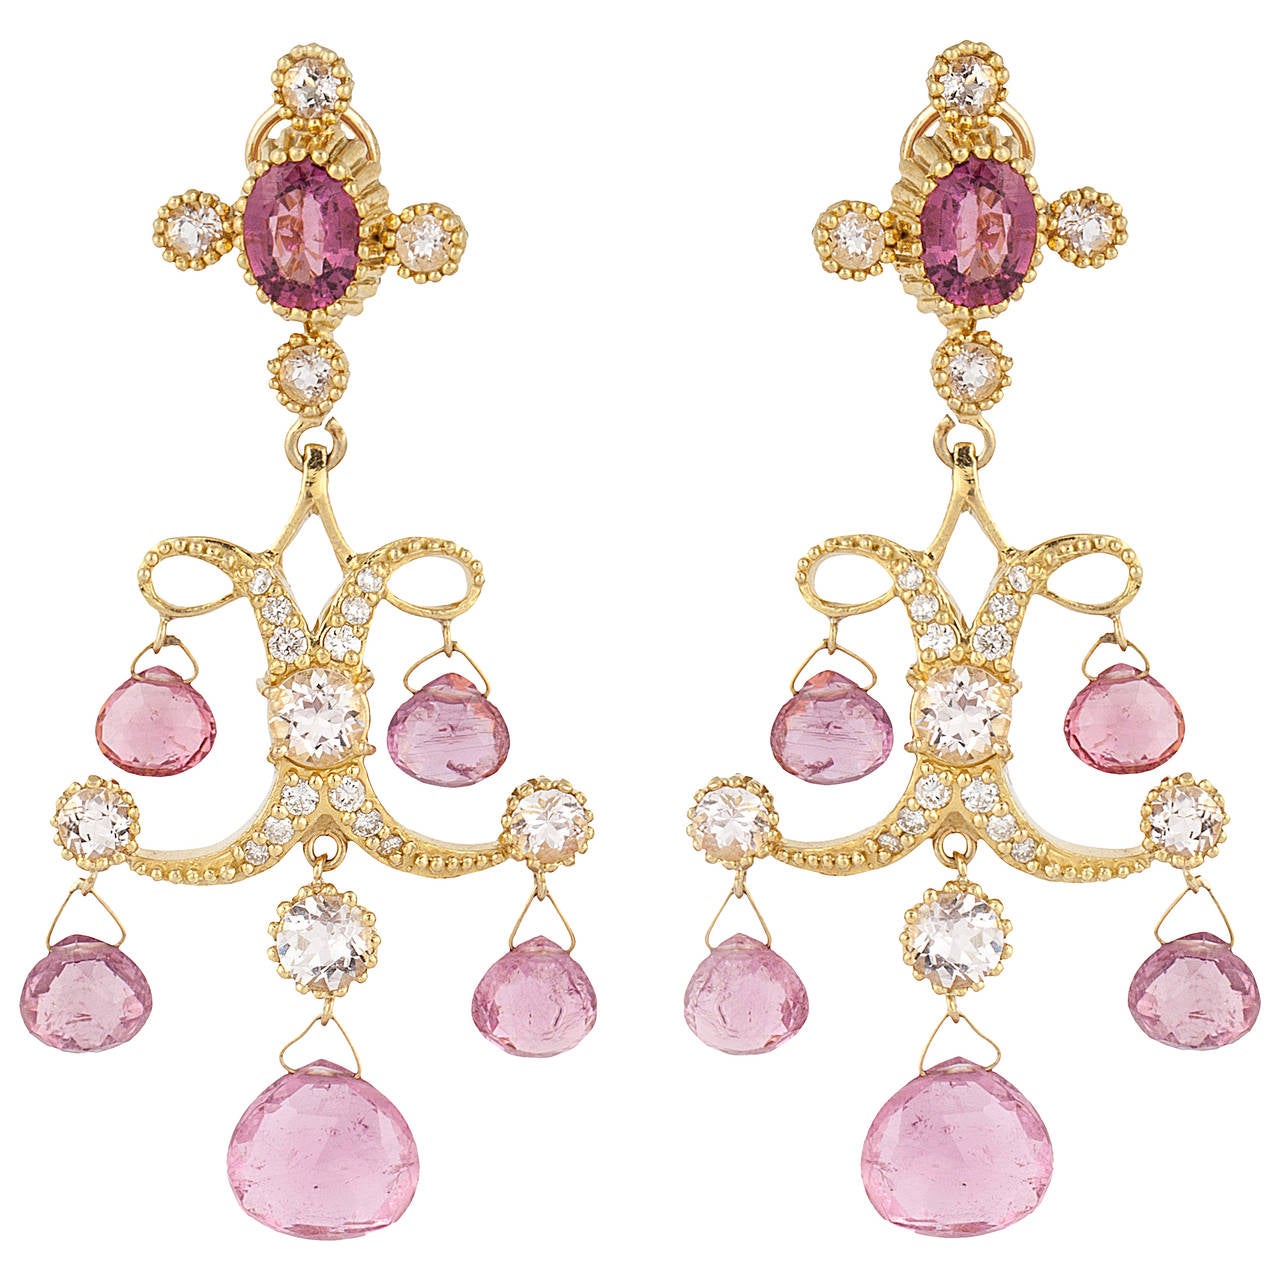 Pink Tourmaline Diamond Gold Chandelier Earrings For Sale at 1stdibs